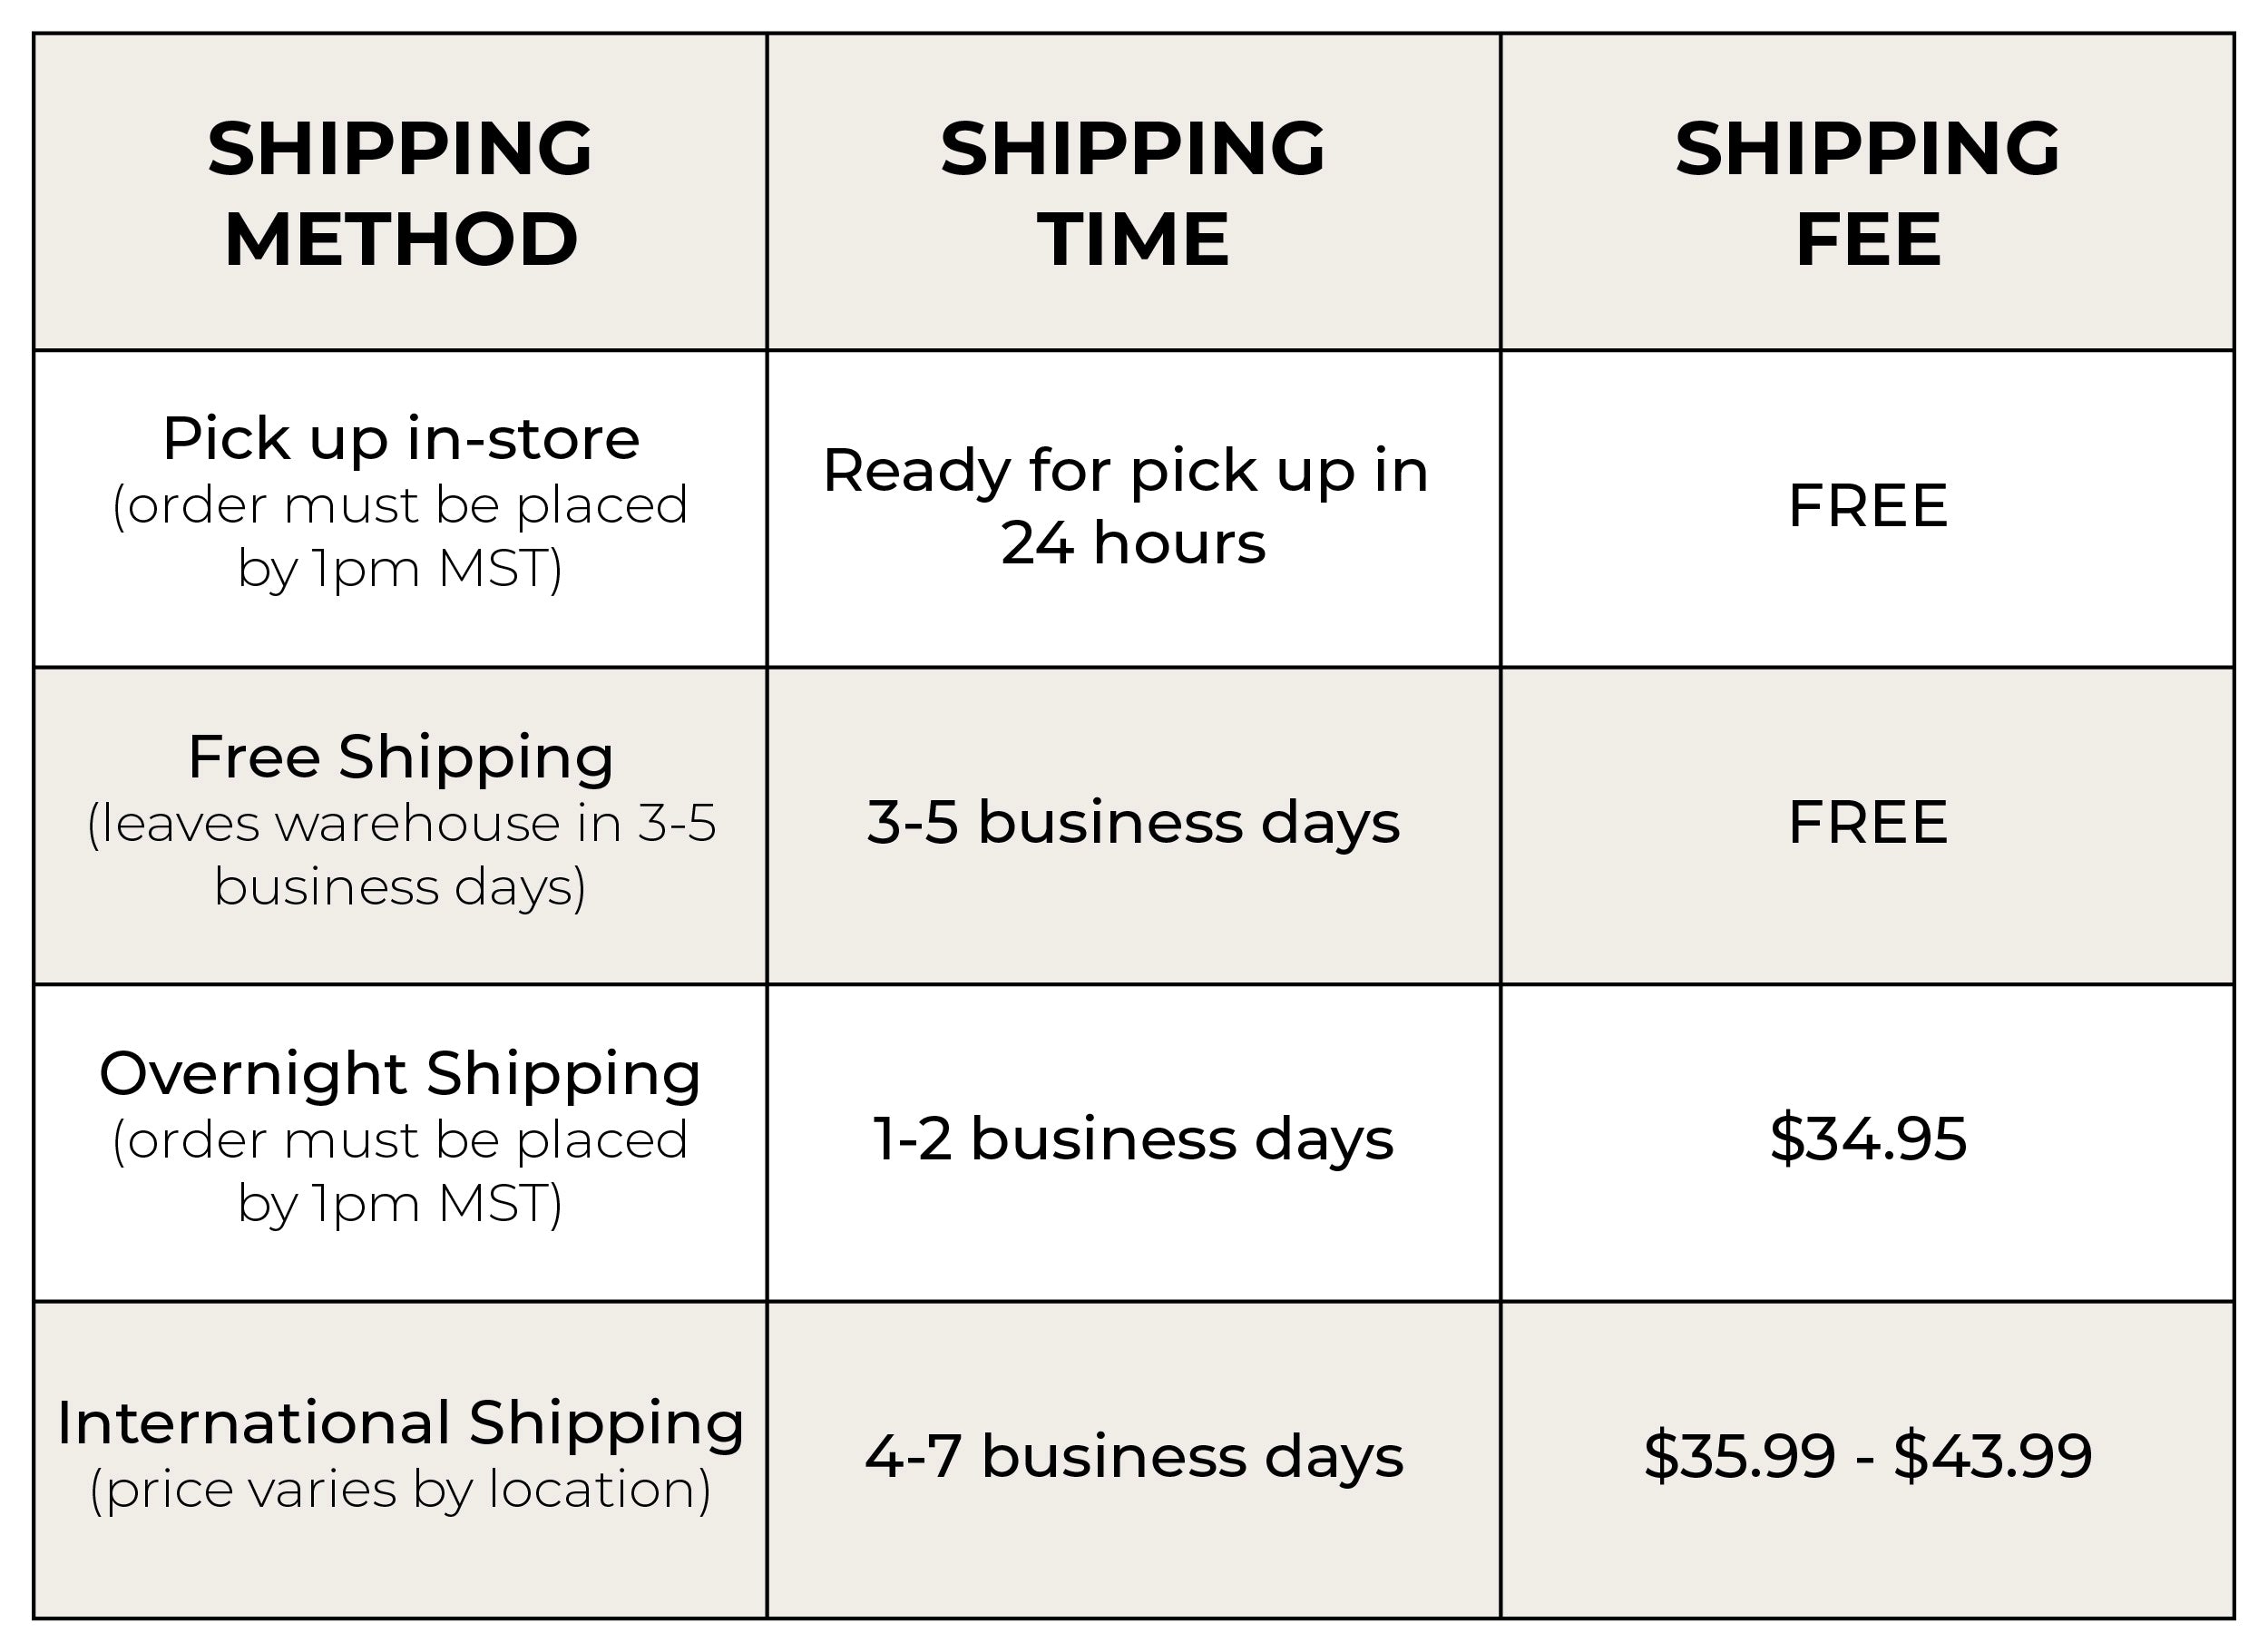 Shipping options separated by price